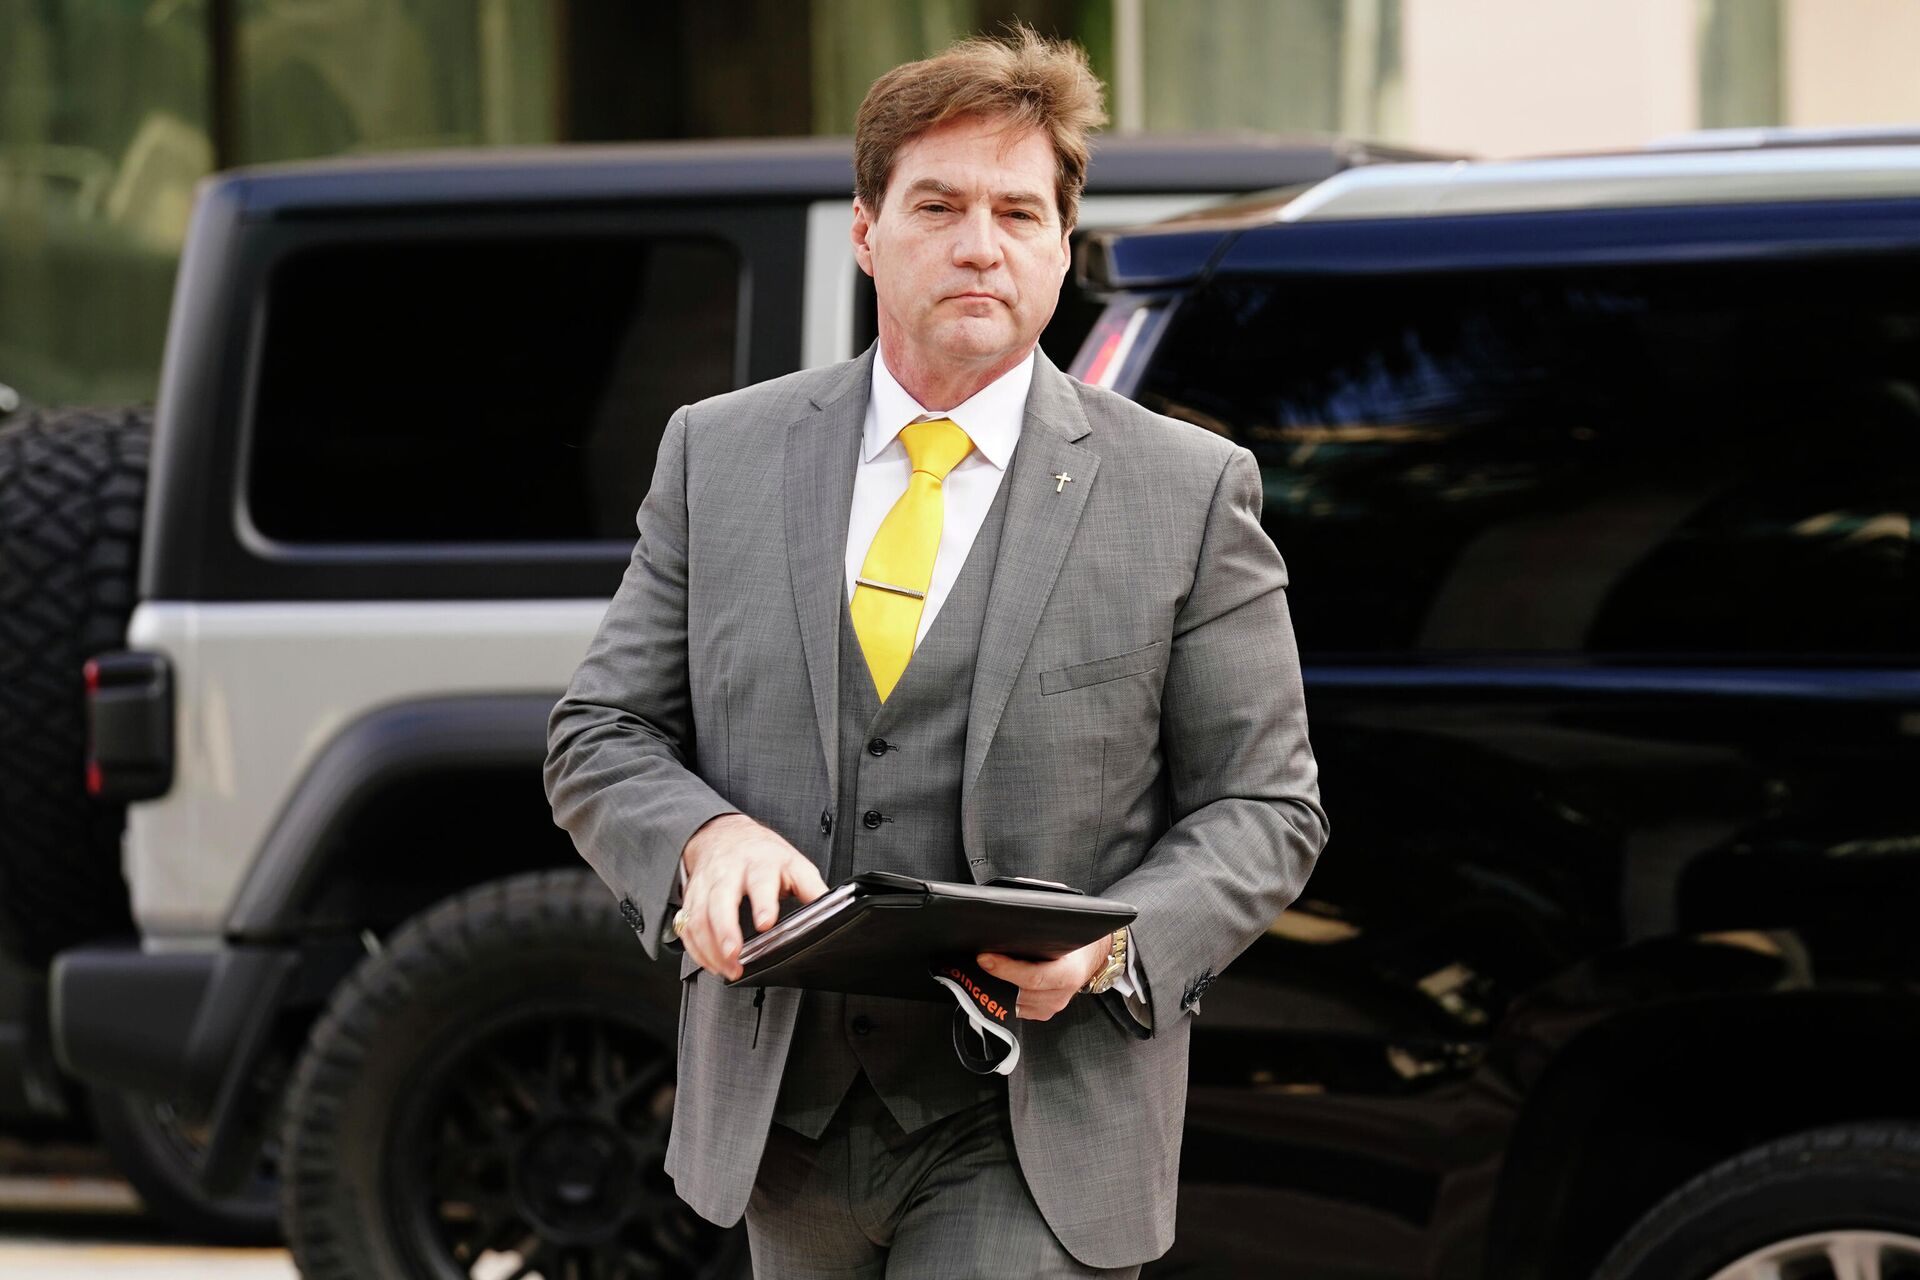 Dr. Craig Wright arrives at the Federal Courthouse, Tuesday, Nov. 16, 2021, in Miami. Wright is in a civil trial with Ira Kleiman. Kleiman claims that his deceased brother David and Wright were co-creators of Bitcoin. - Sputnik International, 1920, 20.11.2021